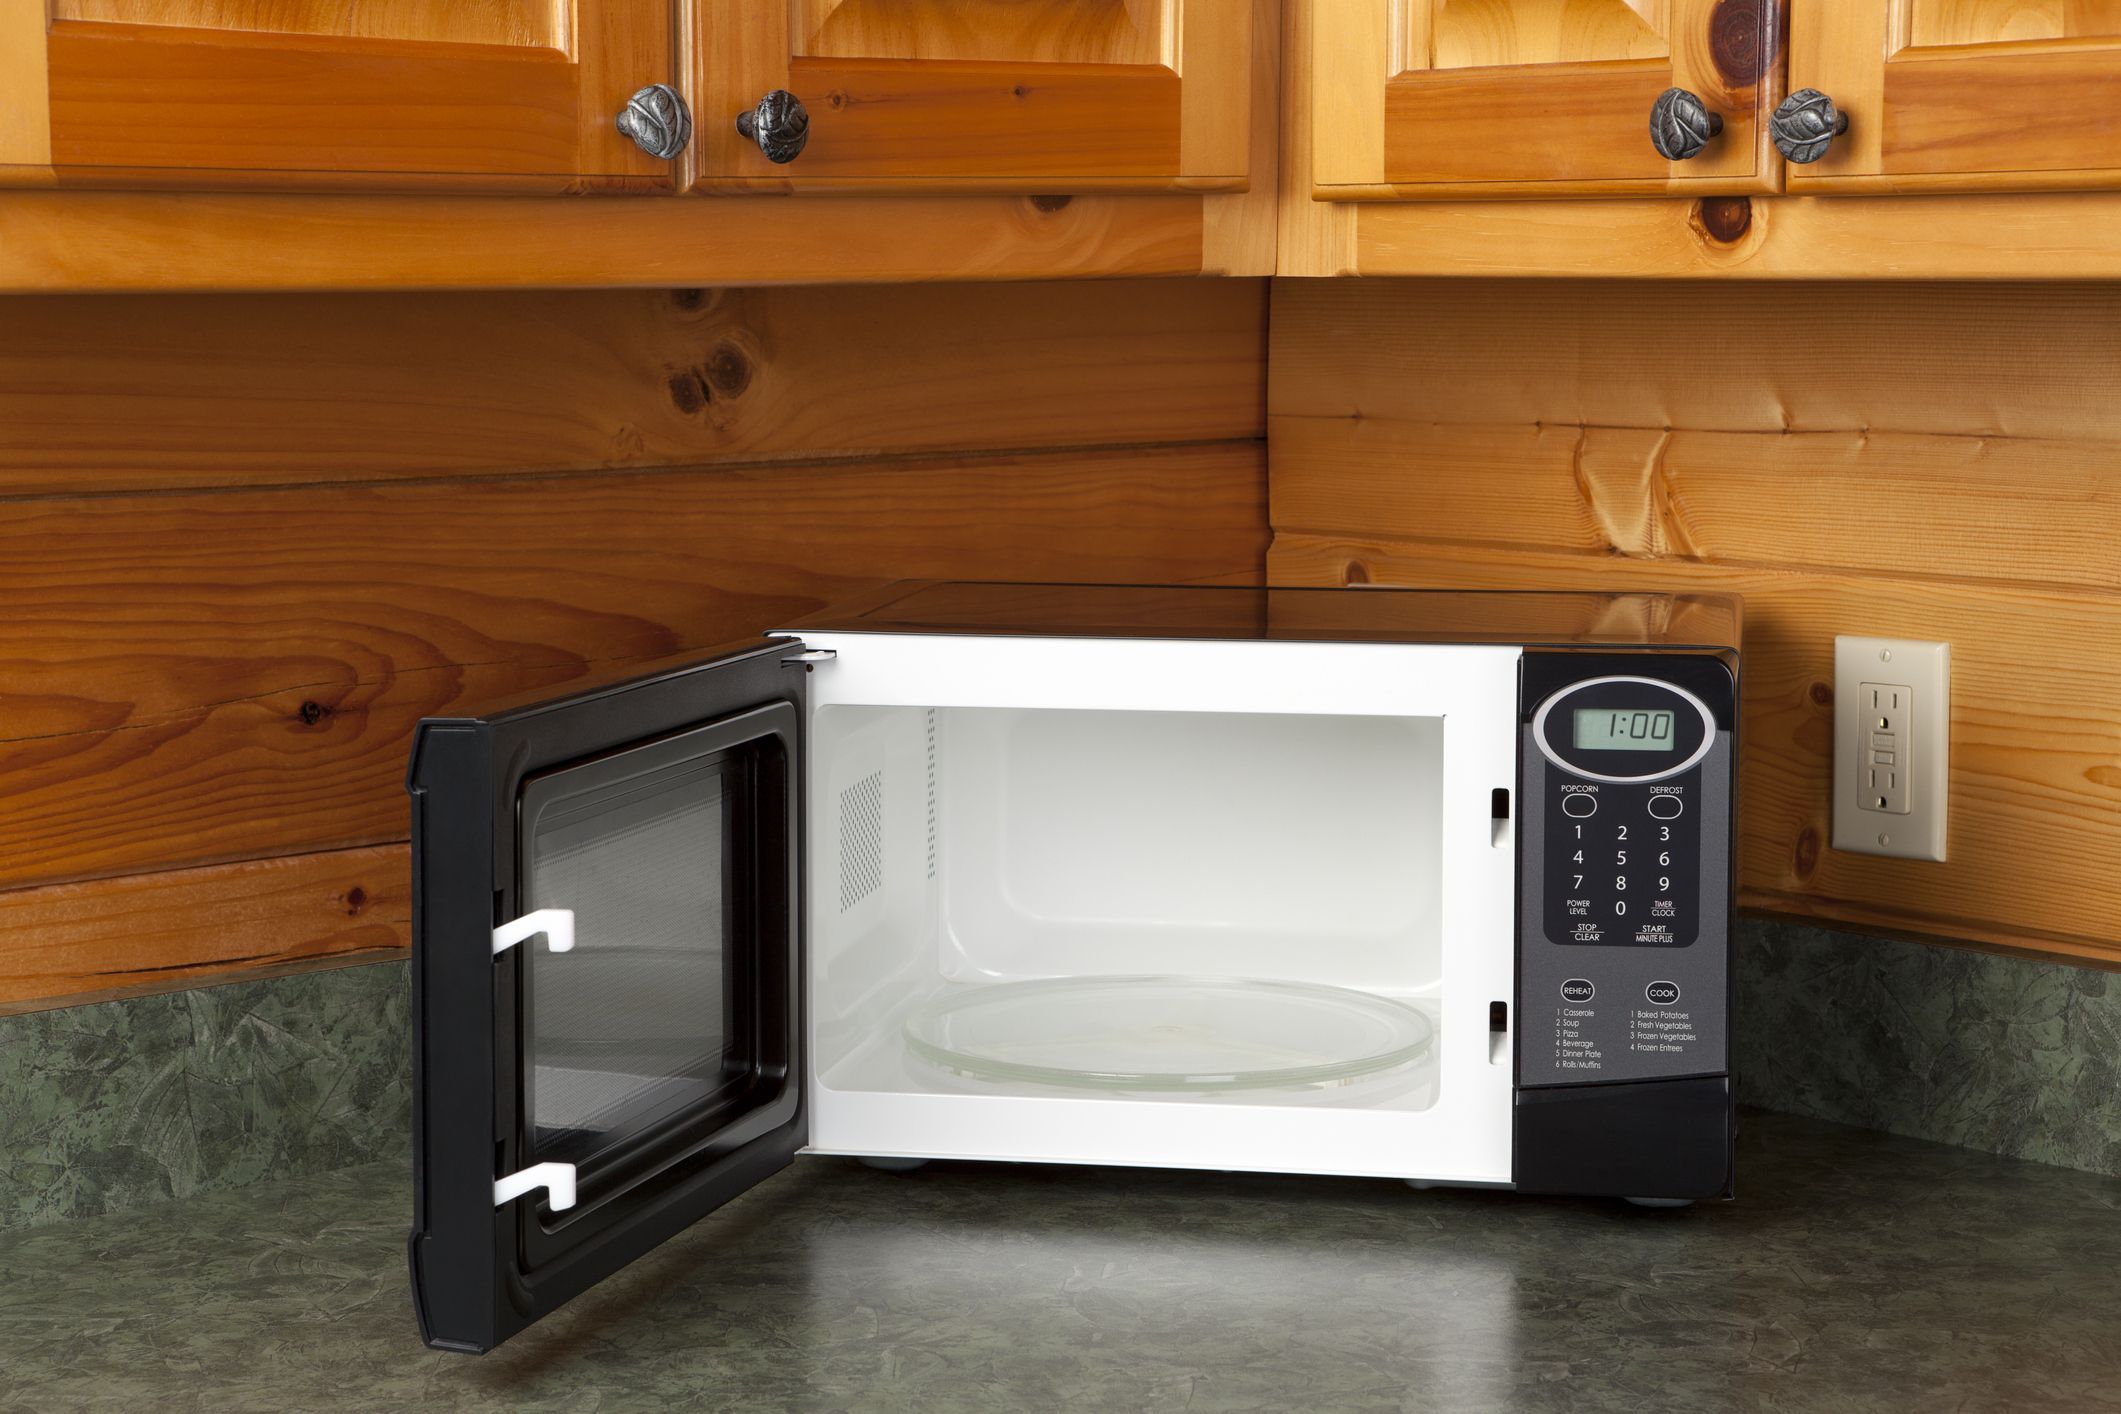 How to Clean a Microwave - The Home Depot